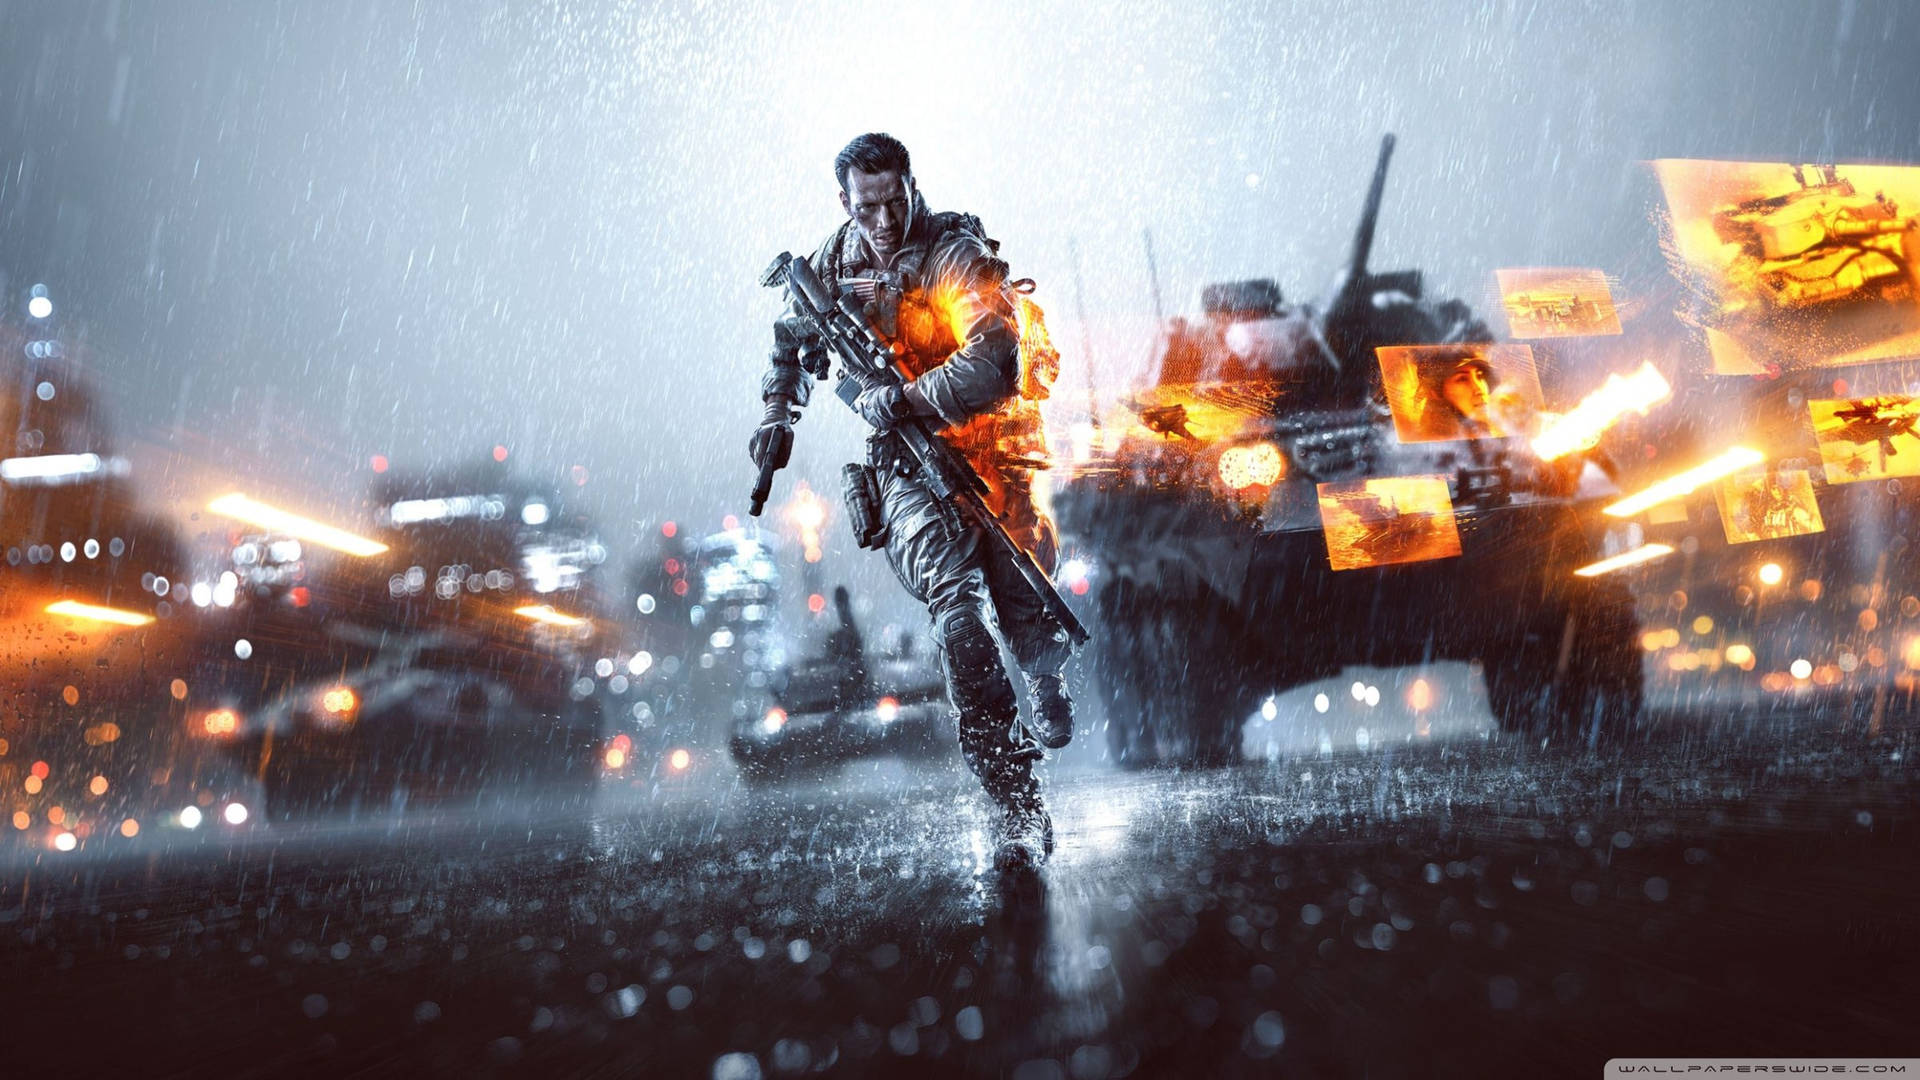 Dynamic And Tense Atmosphere In The Battlefield 3 Battleground Hd Background